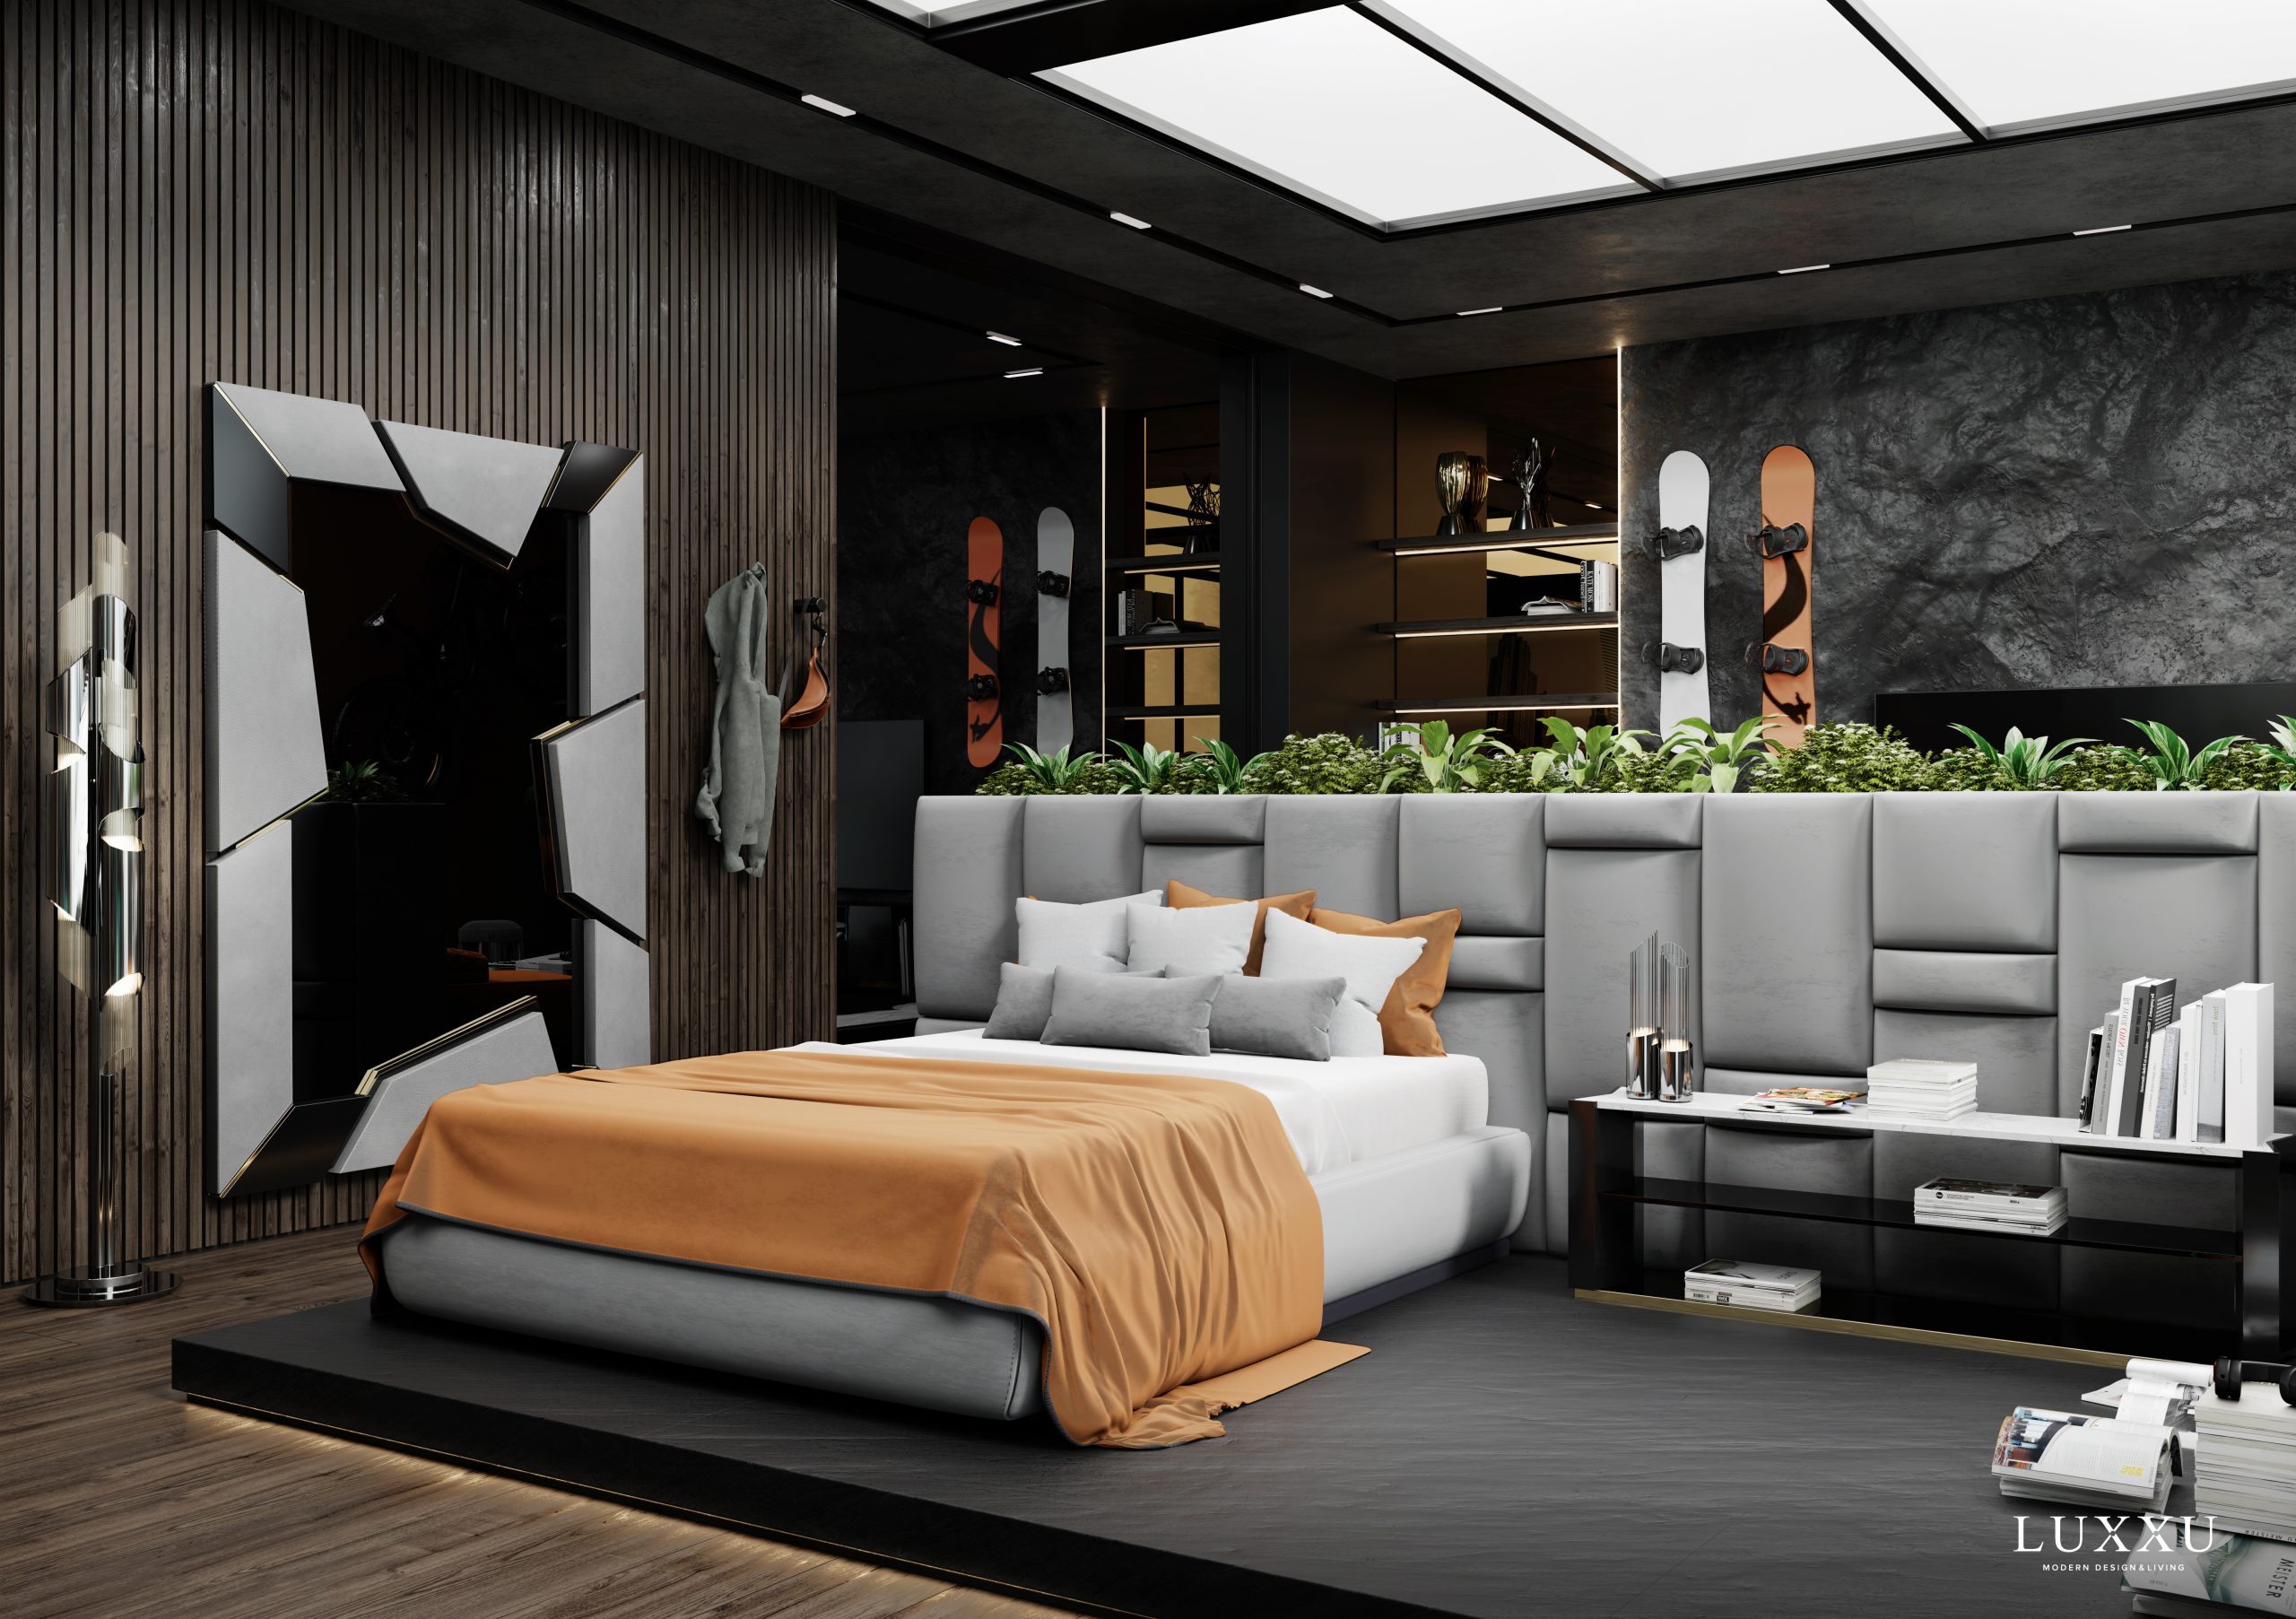 Luxury Teenager Bedroom - Youth And Exquisiteness Combined By Luxxu